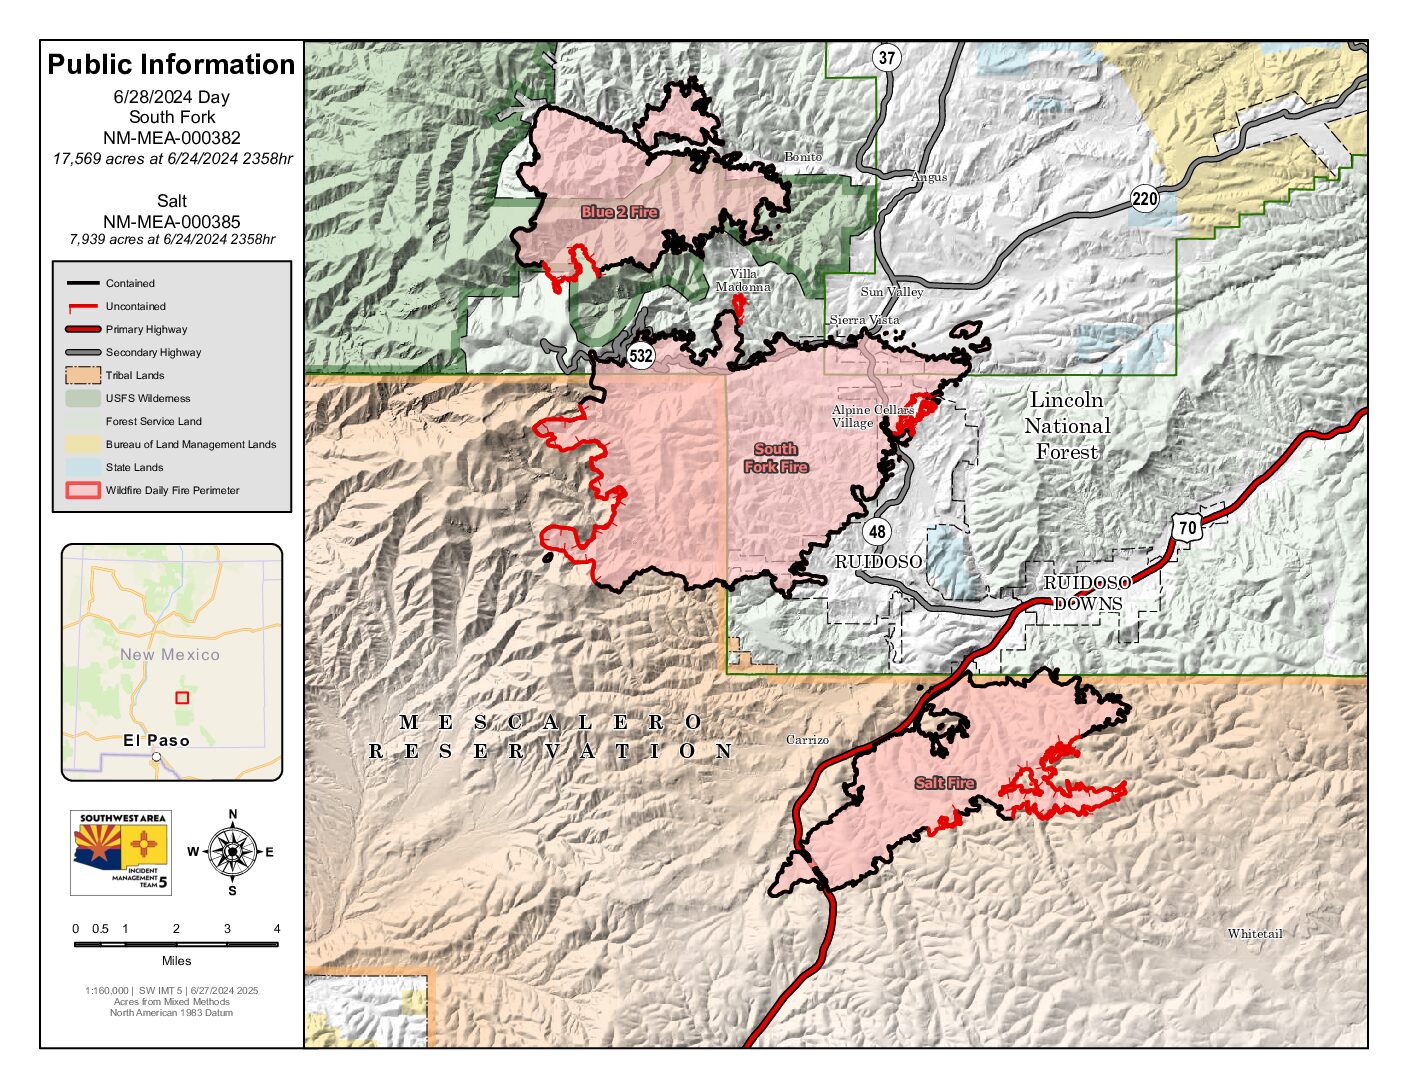 2024 NMMEA South Fork and Salt Fire Update 6/28